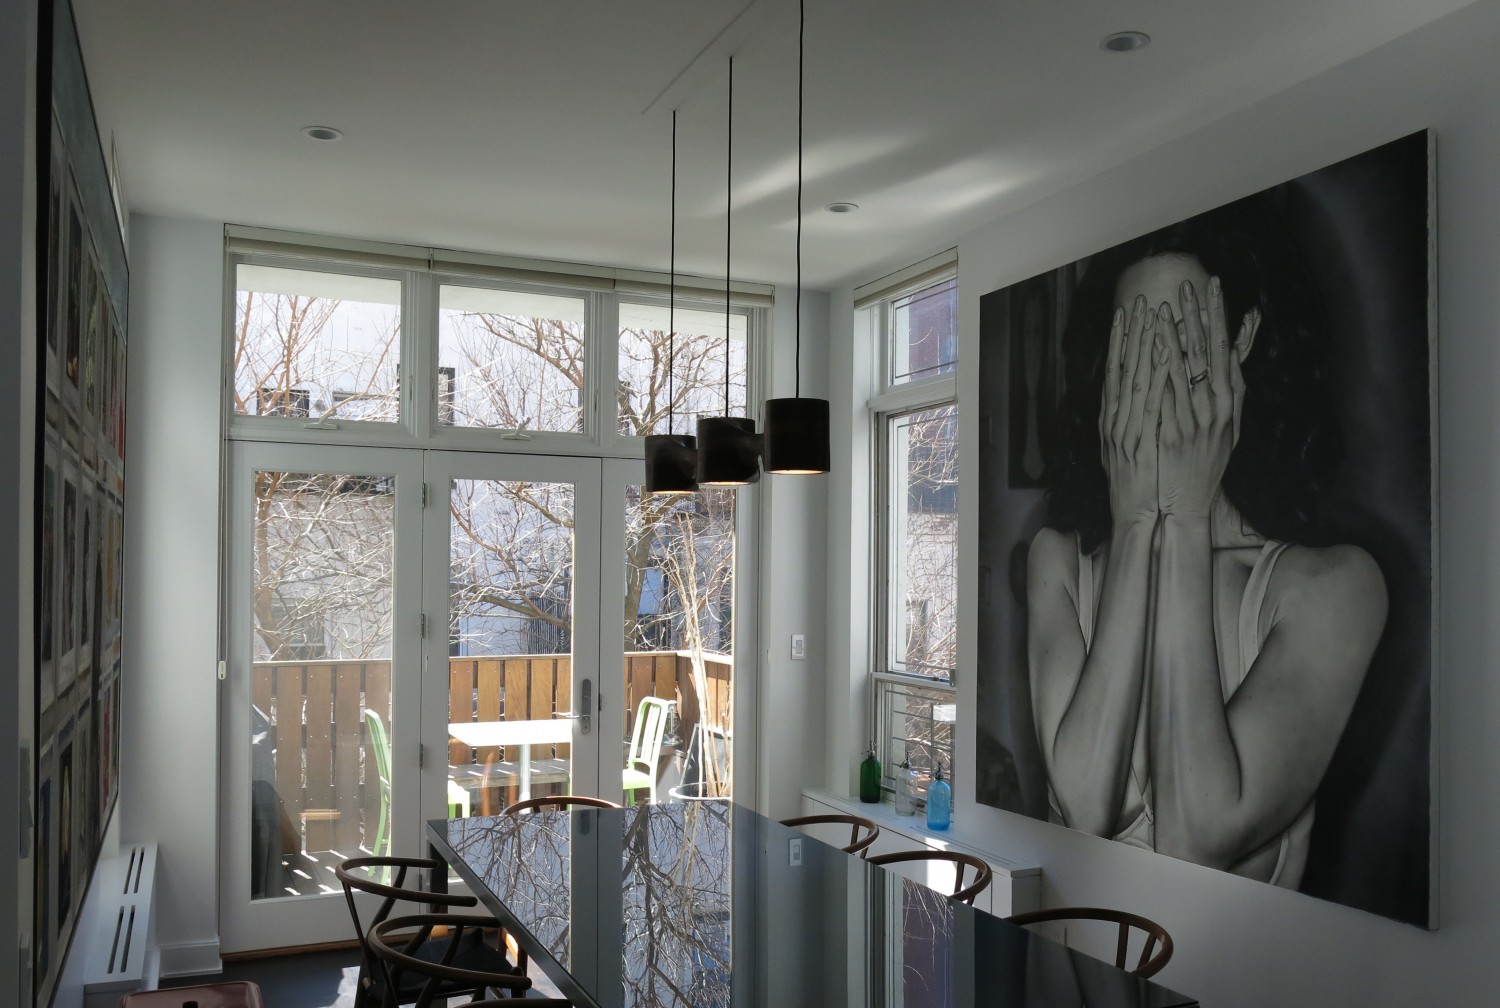 This is a photo of the N3 pendant lamp installed